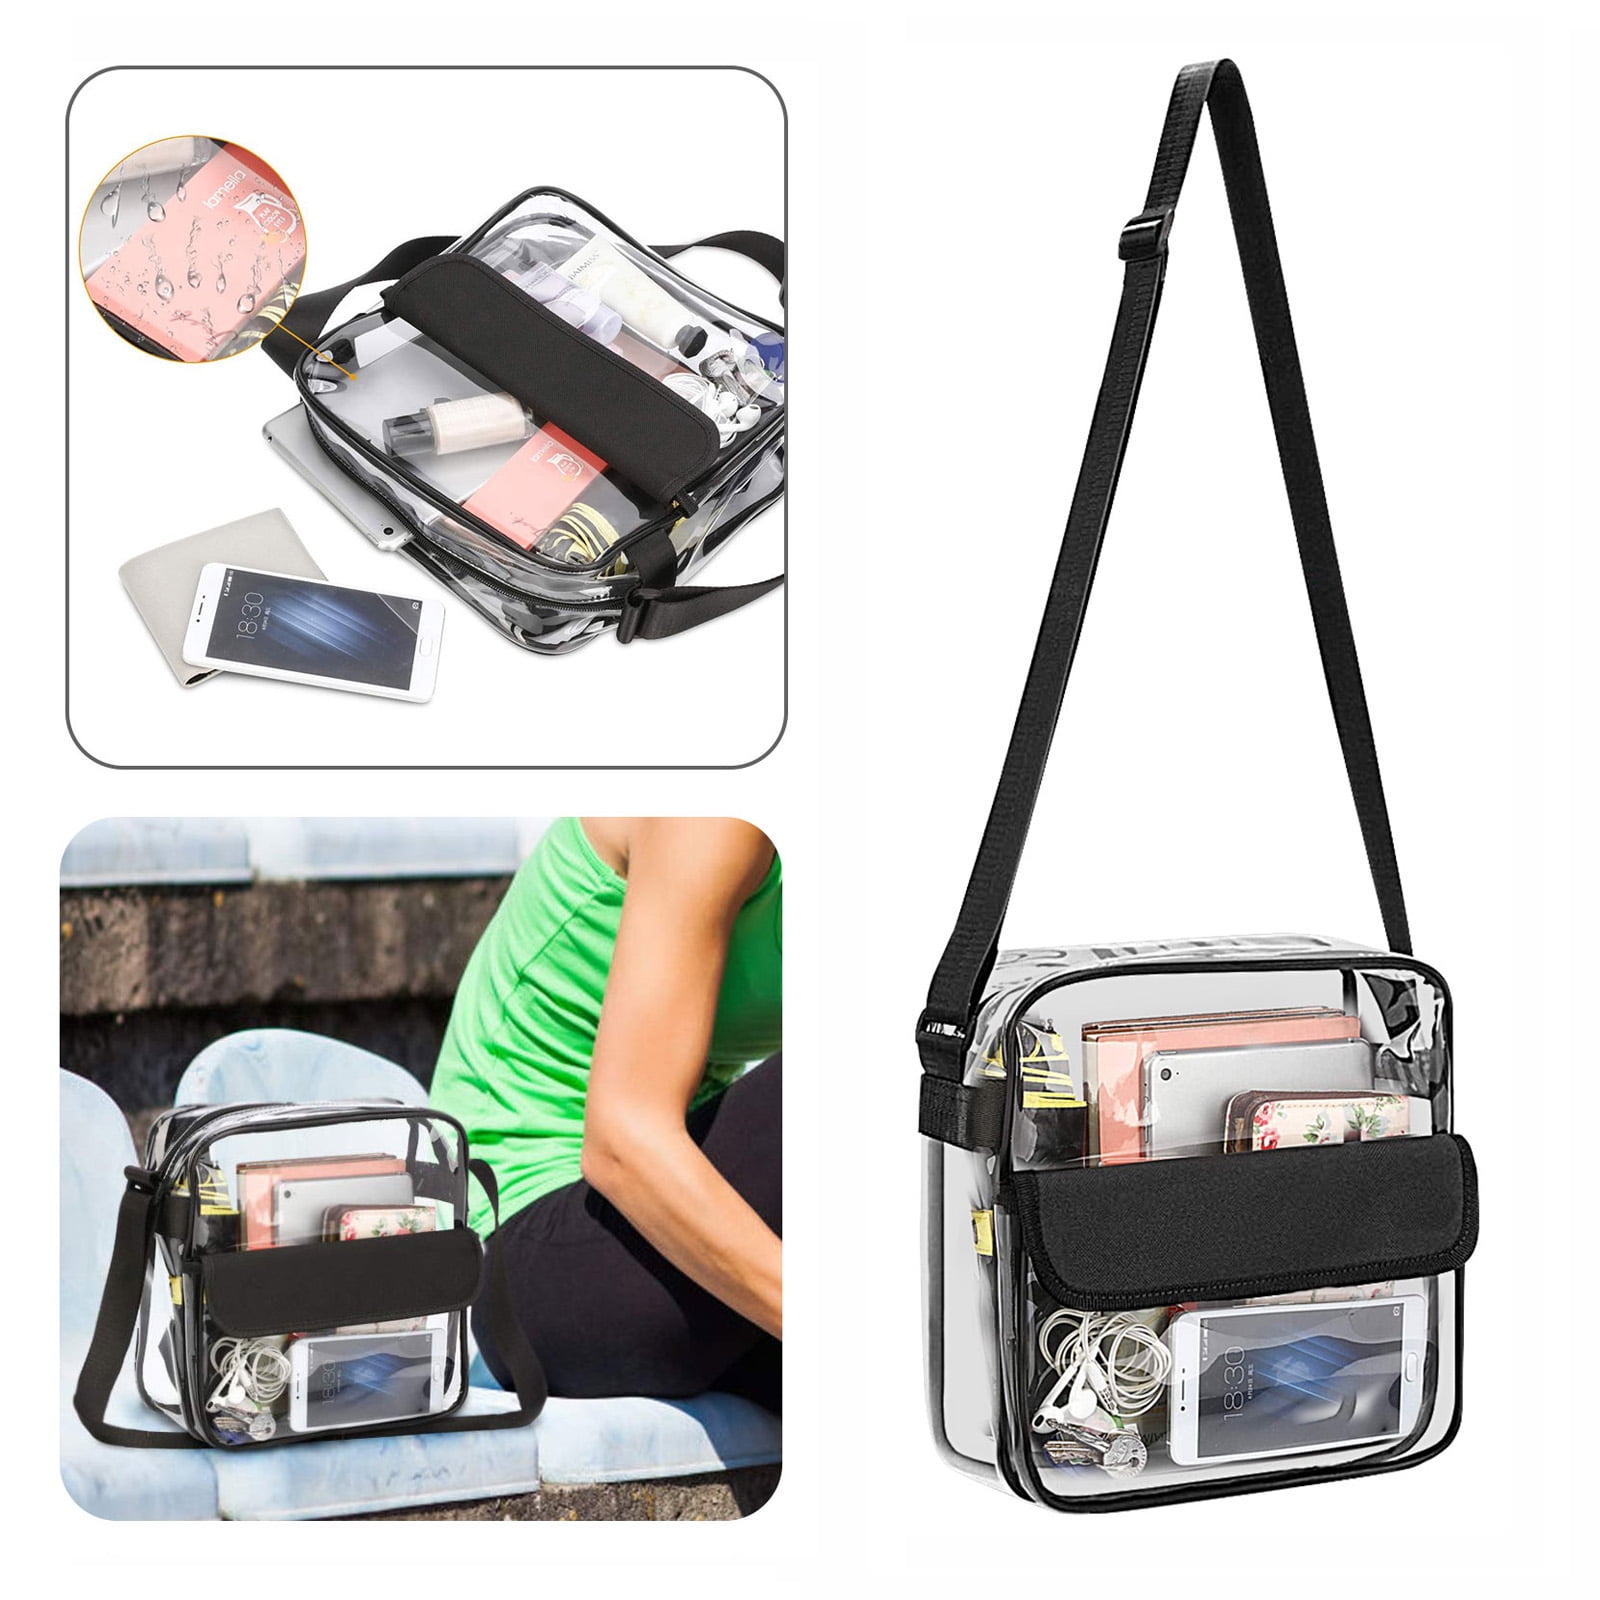 TSV Clear Crossbody Bag, Stadium Approved and Waterproof Shoulder Bag with Adjustable  Strap for Sport Events, Concerts 